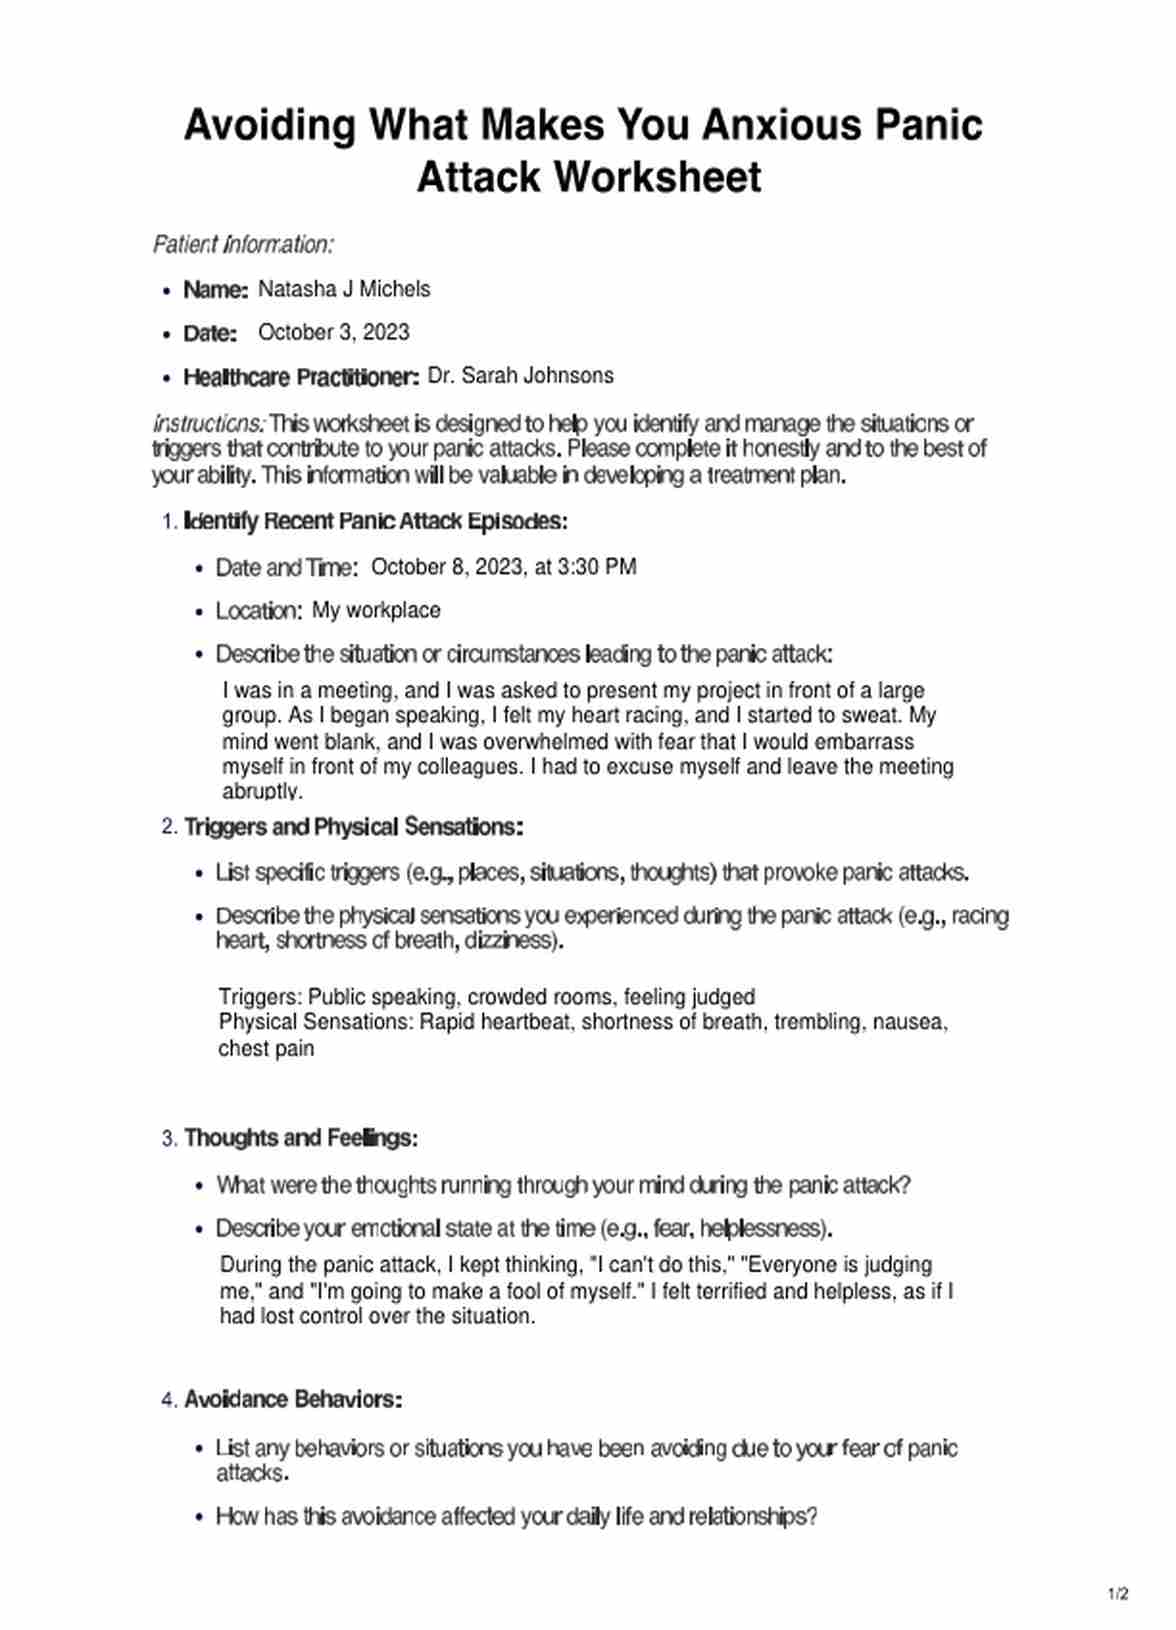 Avoiding What Makes You Anxious Panic Attack Worksheet PDF Example